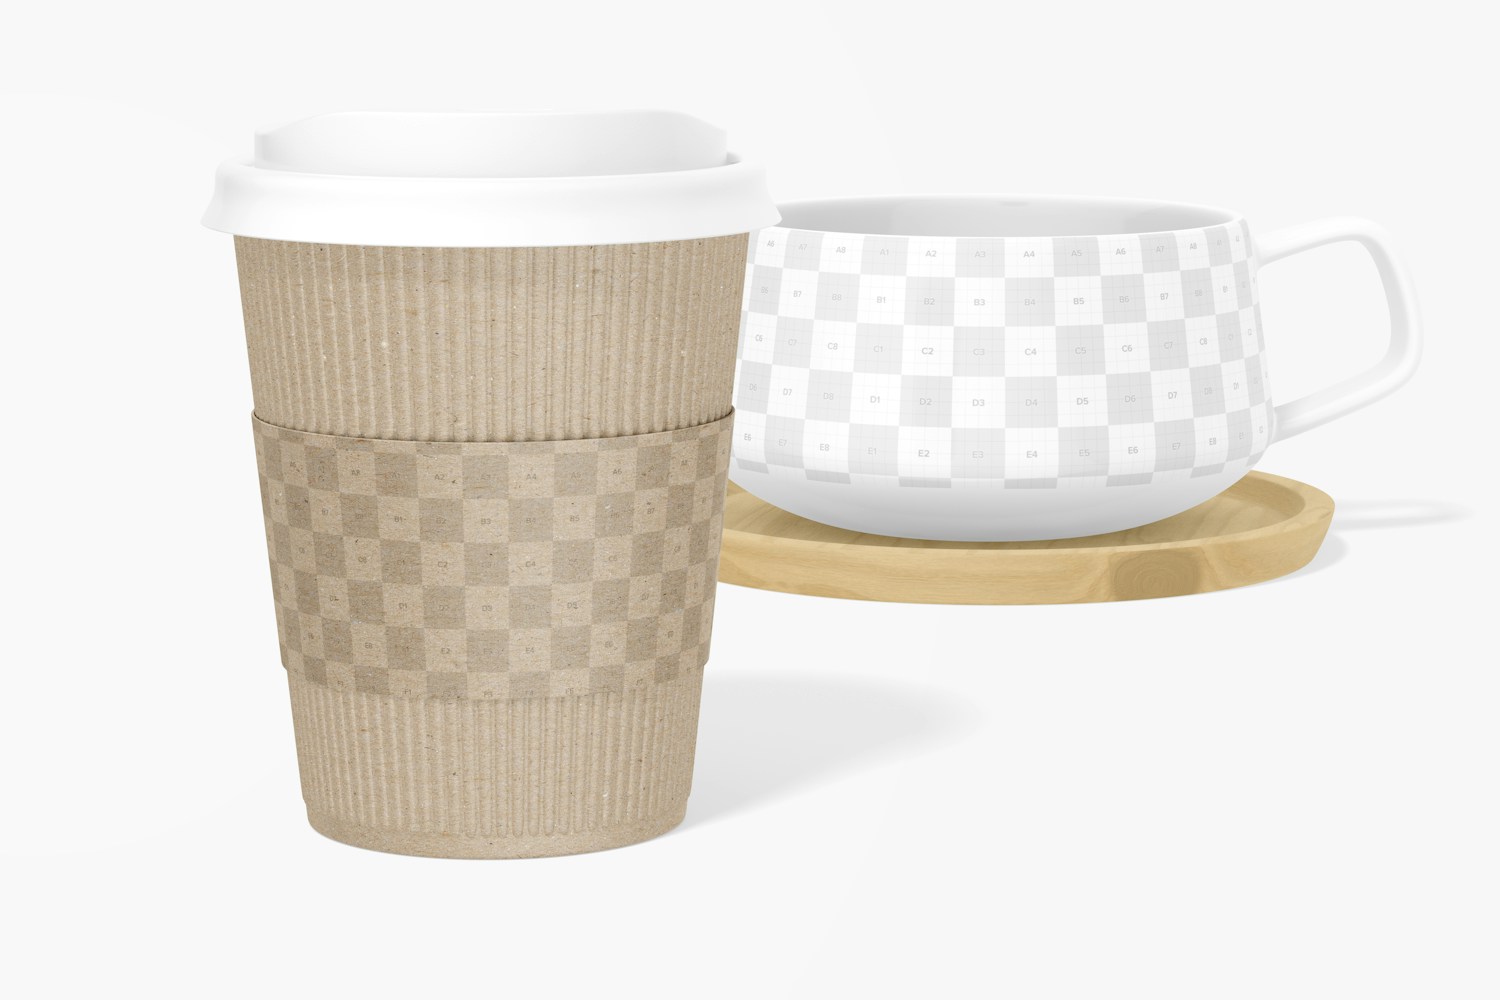 4 oz Paper Coffee Cup with Lid Mockup, Perspective